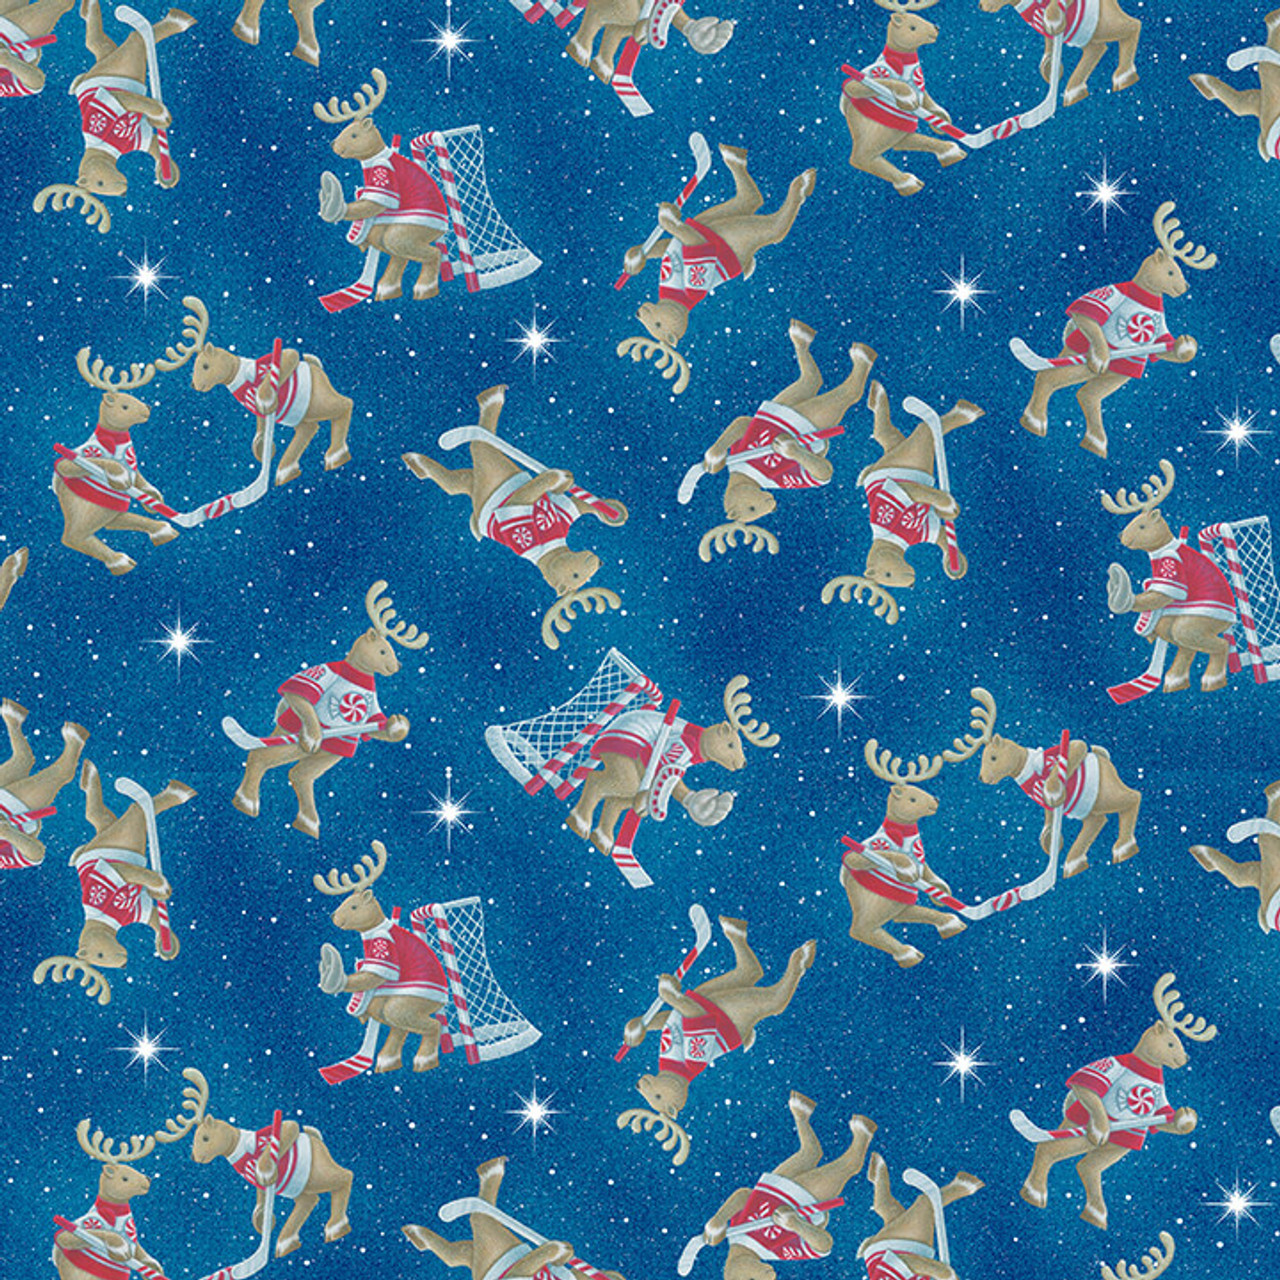 StudioE 12 Days Of Christmas Tossed Reindeer Cyan Cotton Fabric By The Yard